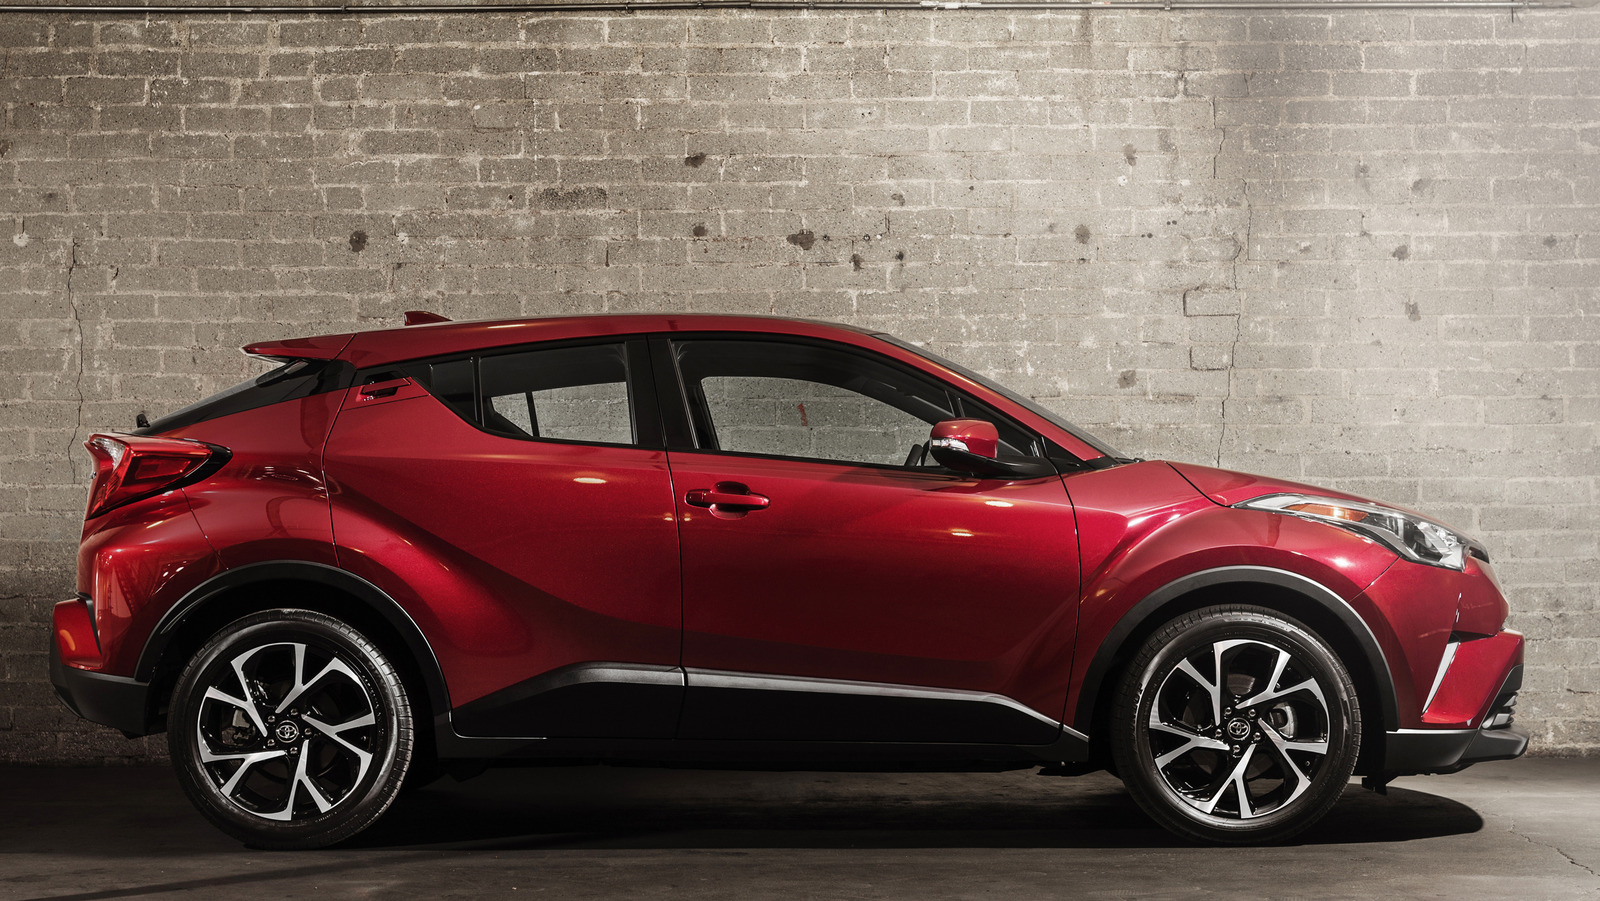 Why Toyota Discontinued The C-HR In The US After 5 Years